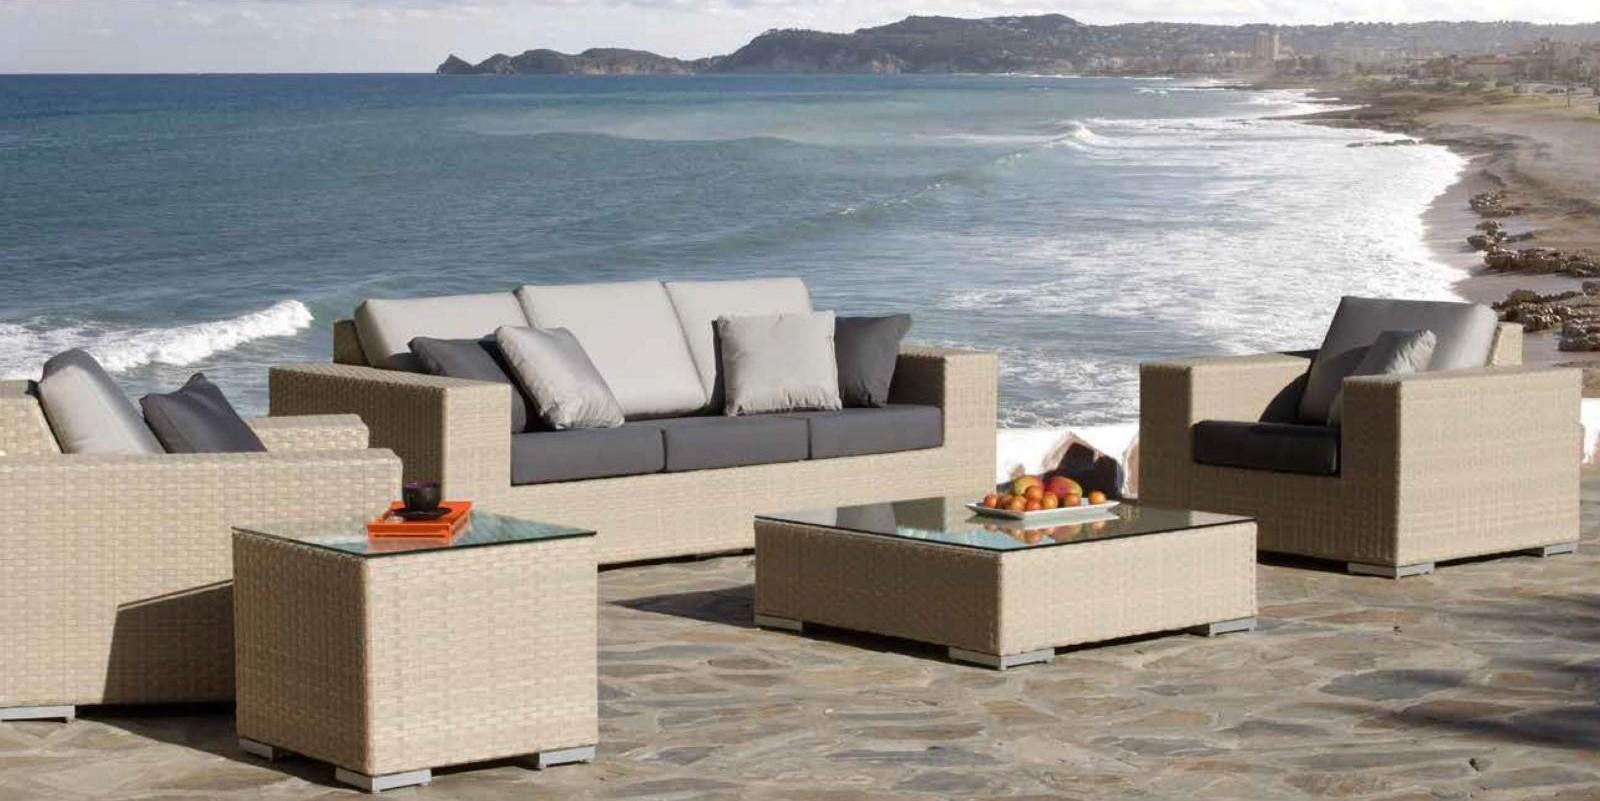 Contemporary Outdoor Conversation Set Cubix 902-1349-KBU-5PS in Off-White, Beige Fabric